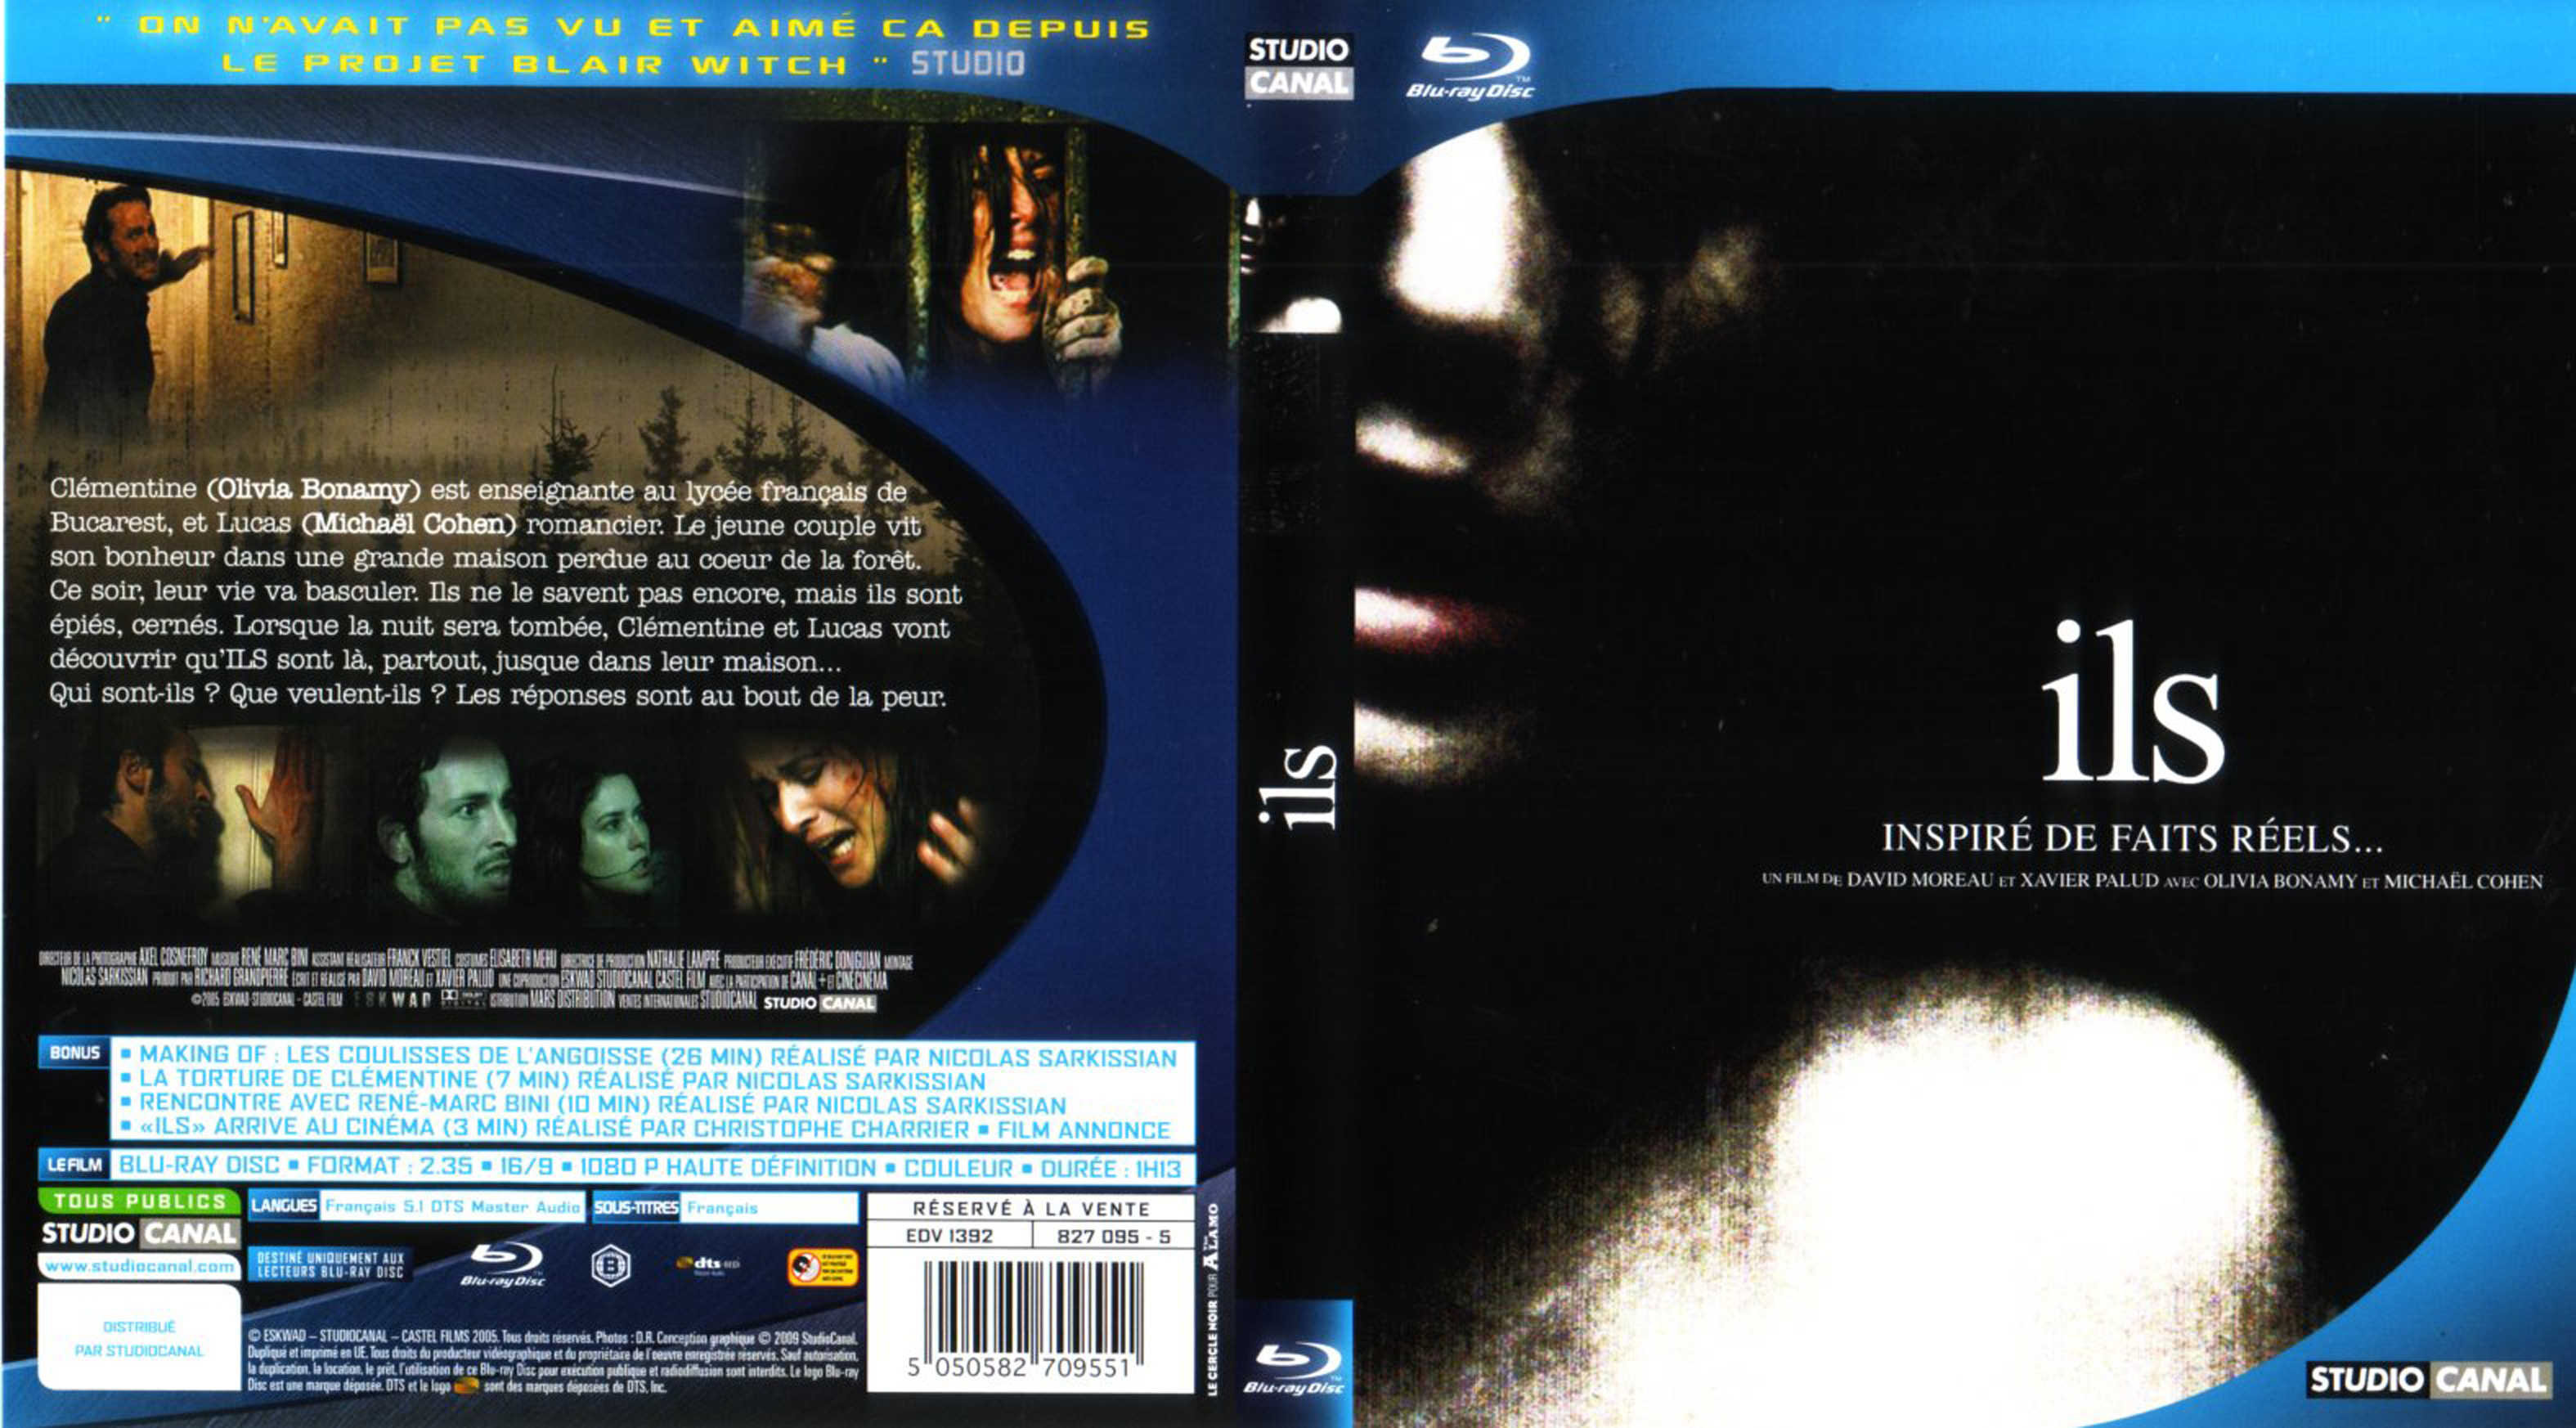 Jaquette DVD Ils (BLU-RAY)